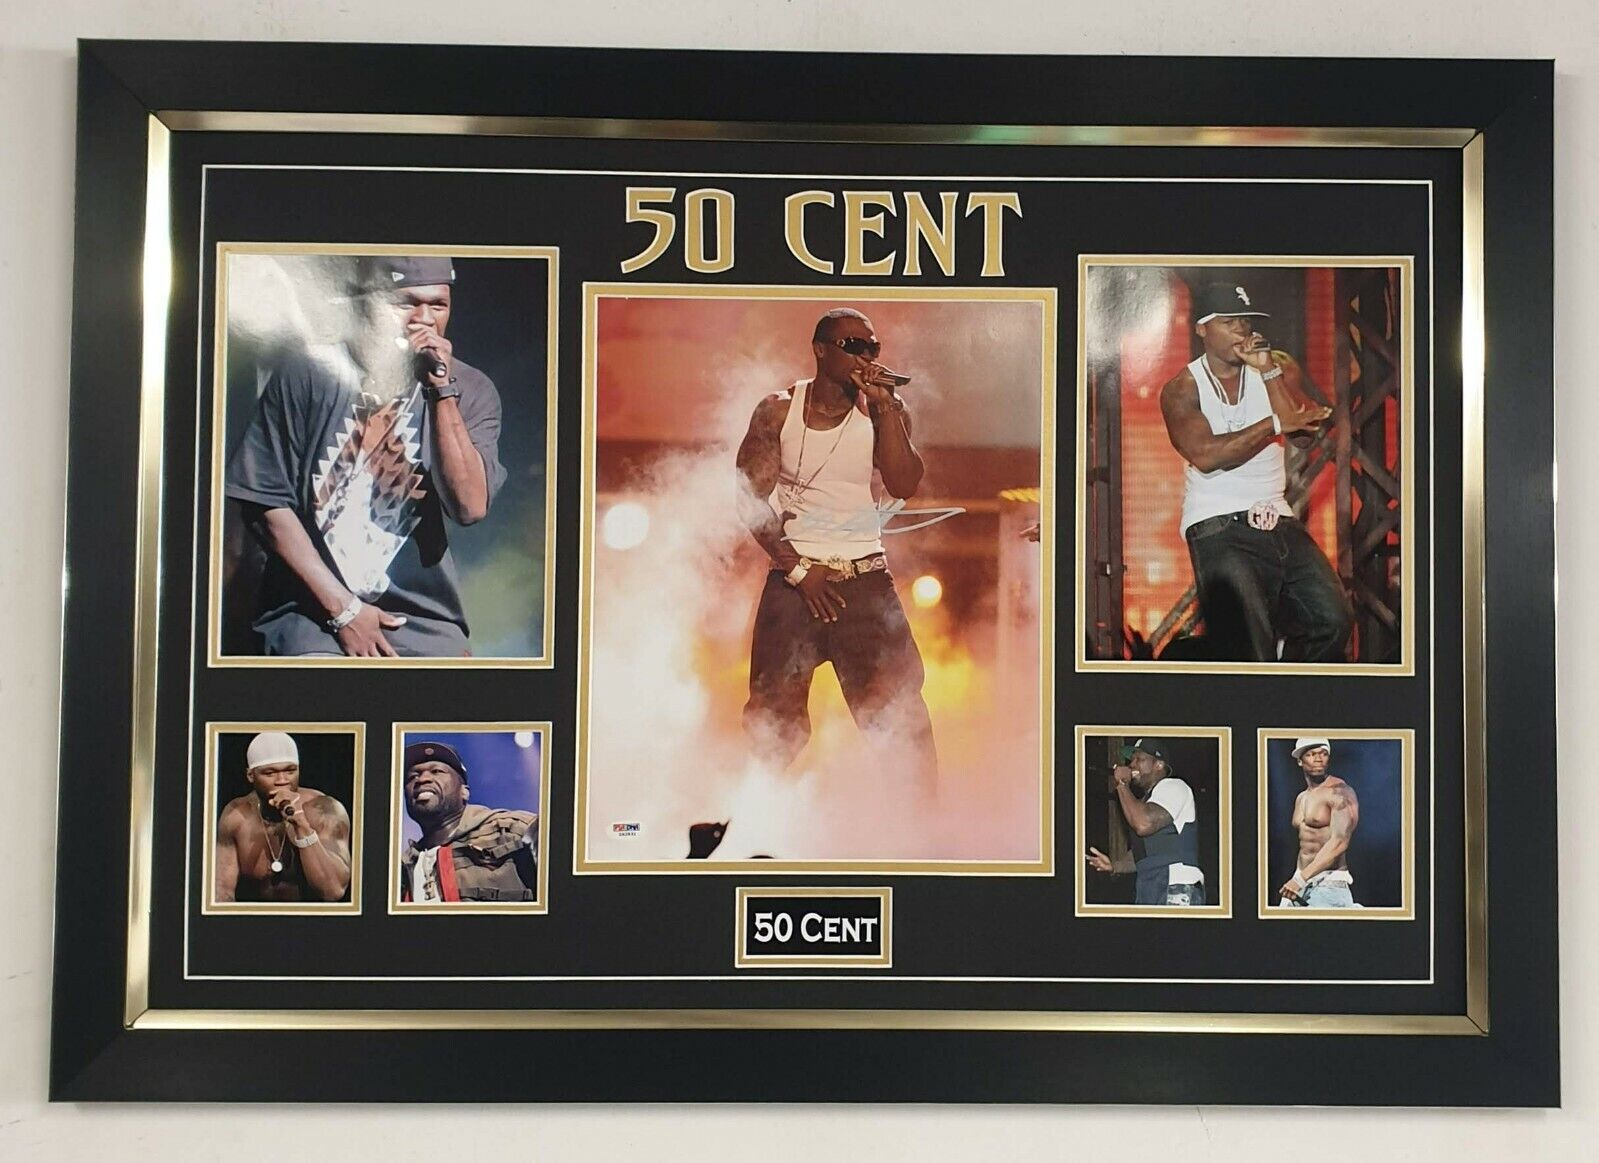 Rare 50 Cent Signed Photo Autographed Picture Display PSA DNA